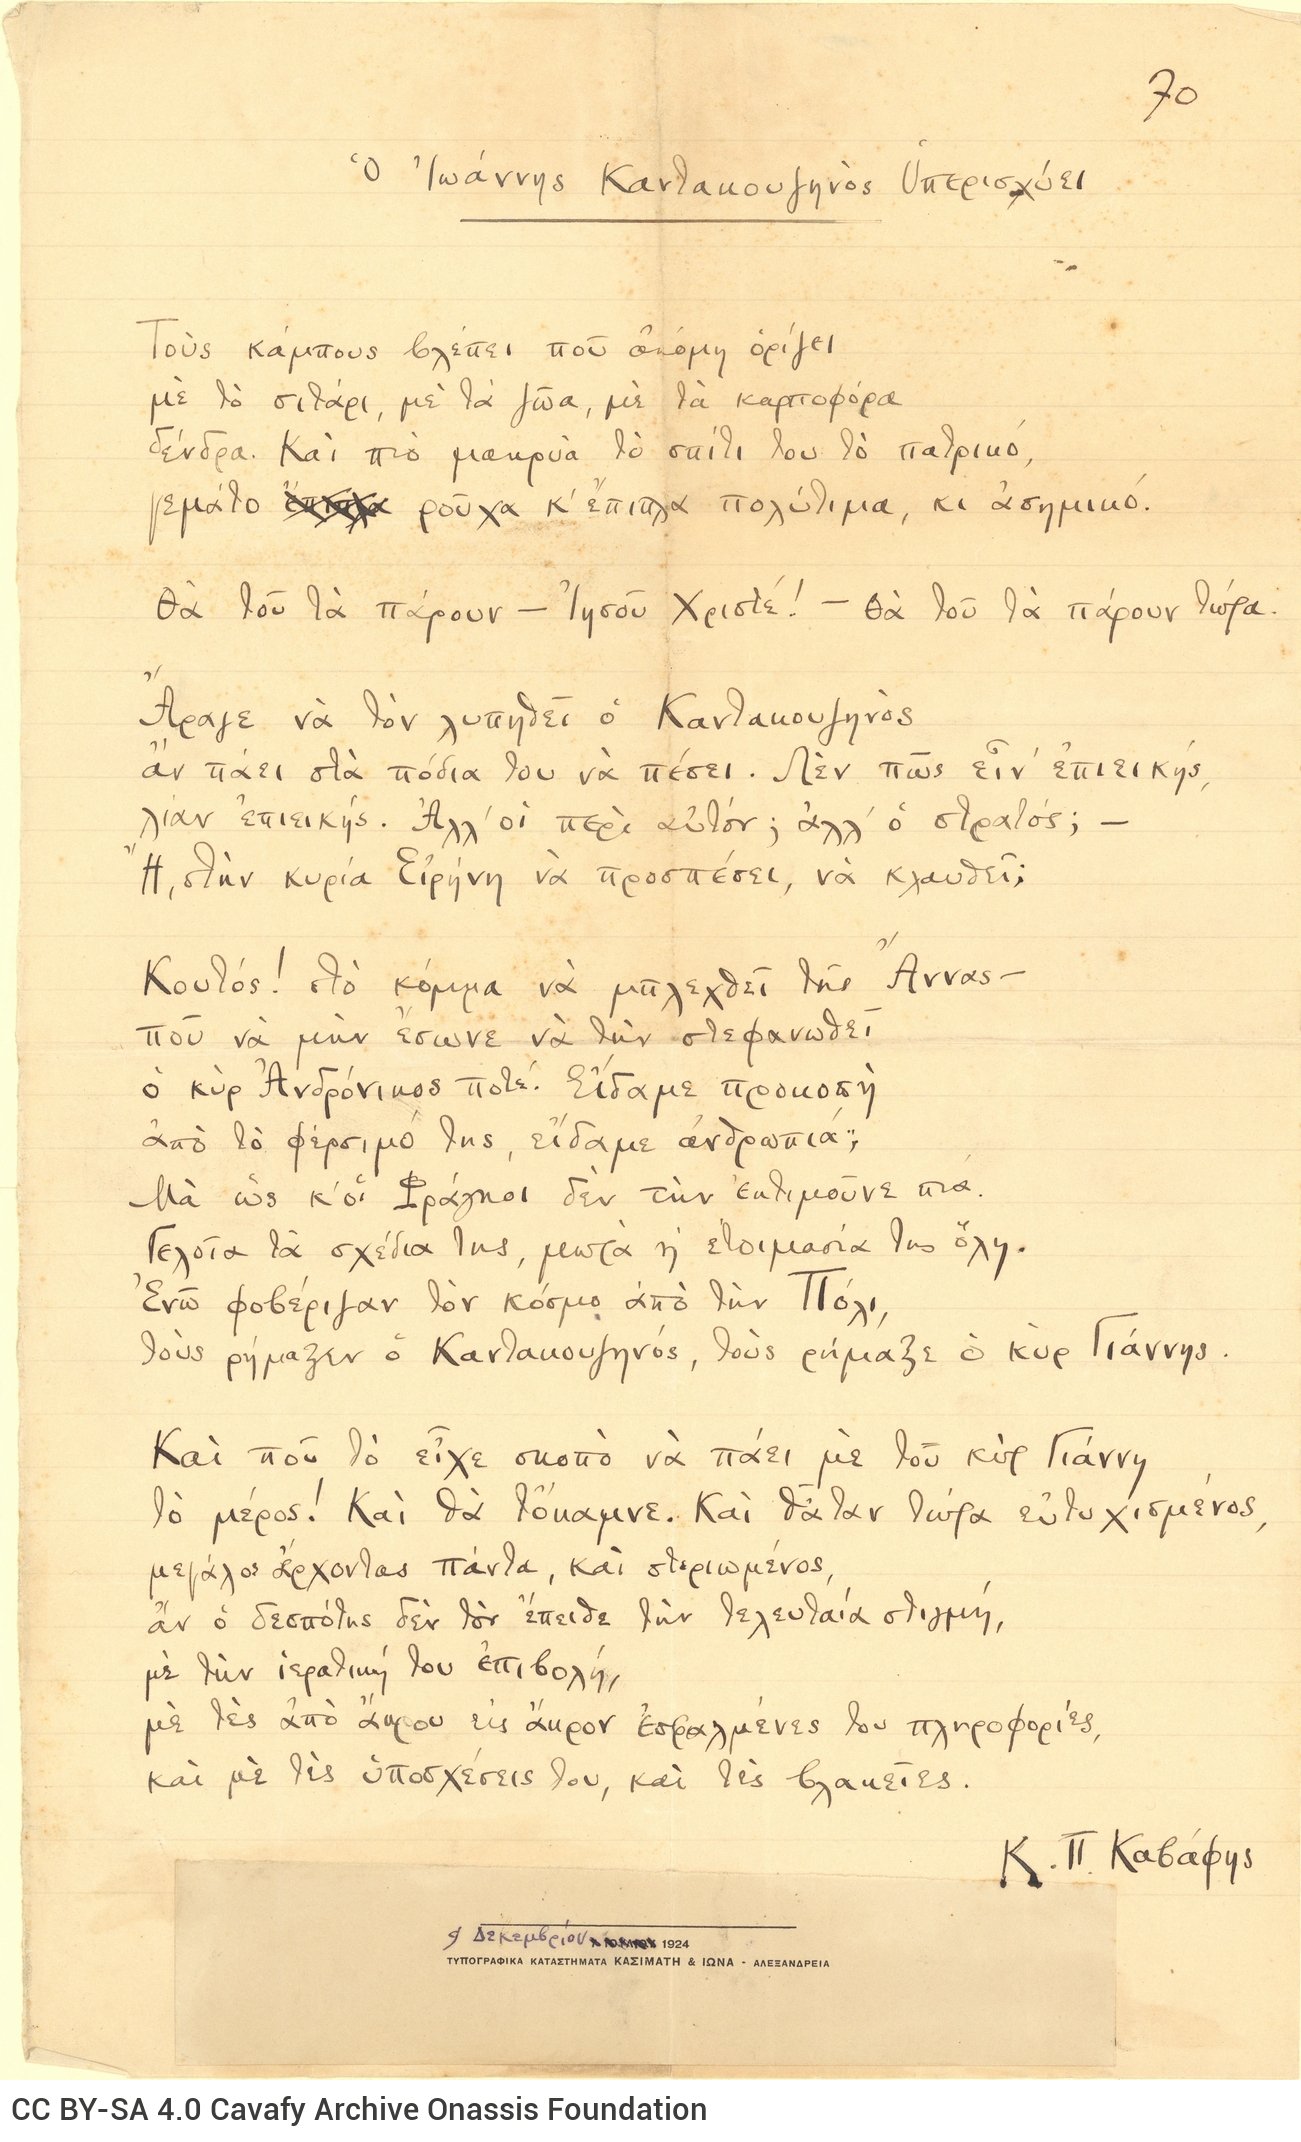 Autograph manuscript of the poem "John Cantacuzenus Triumphs" on one side of a ruled sheet. Cancellations and emendations.